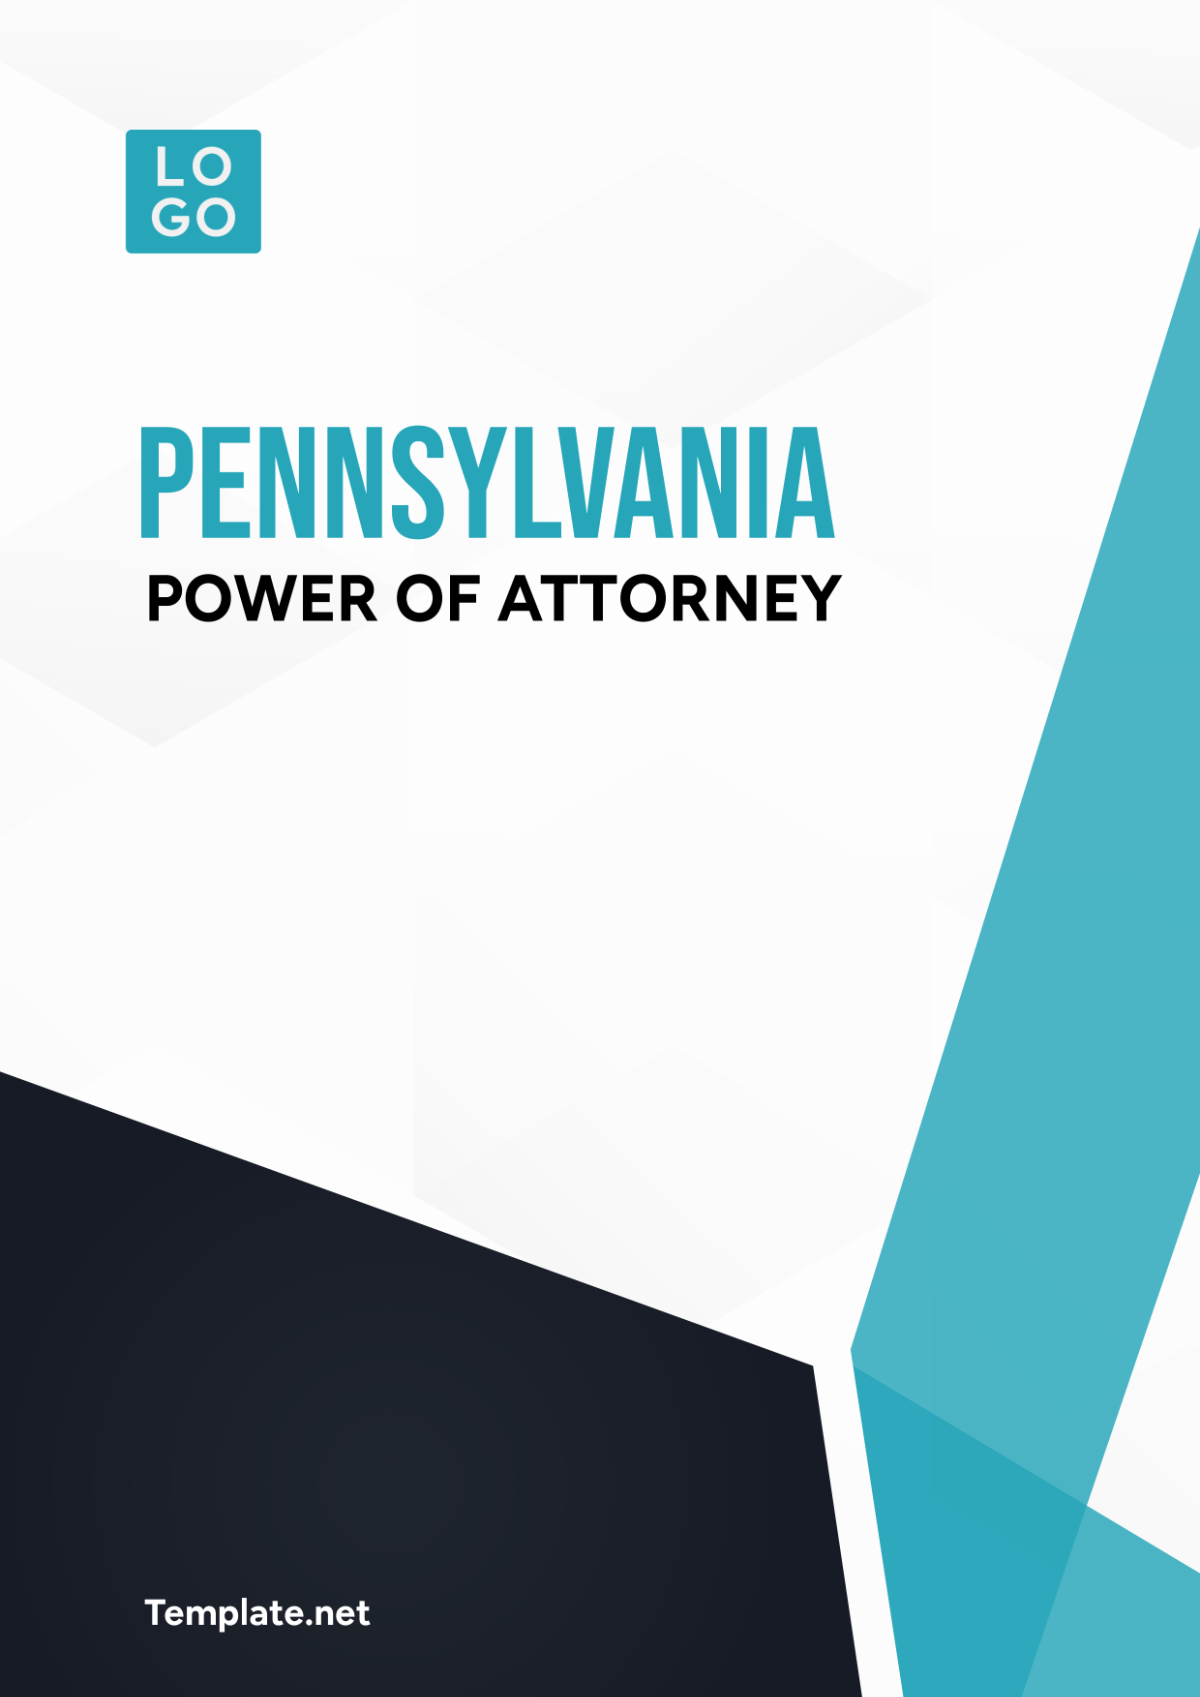 Pennsylvania Power of Attorney Cover Page Template